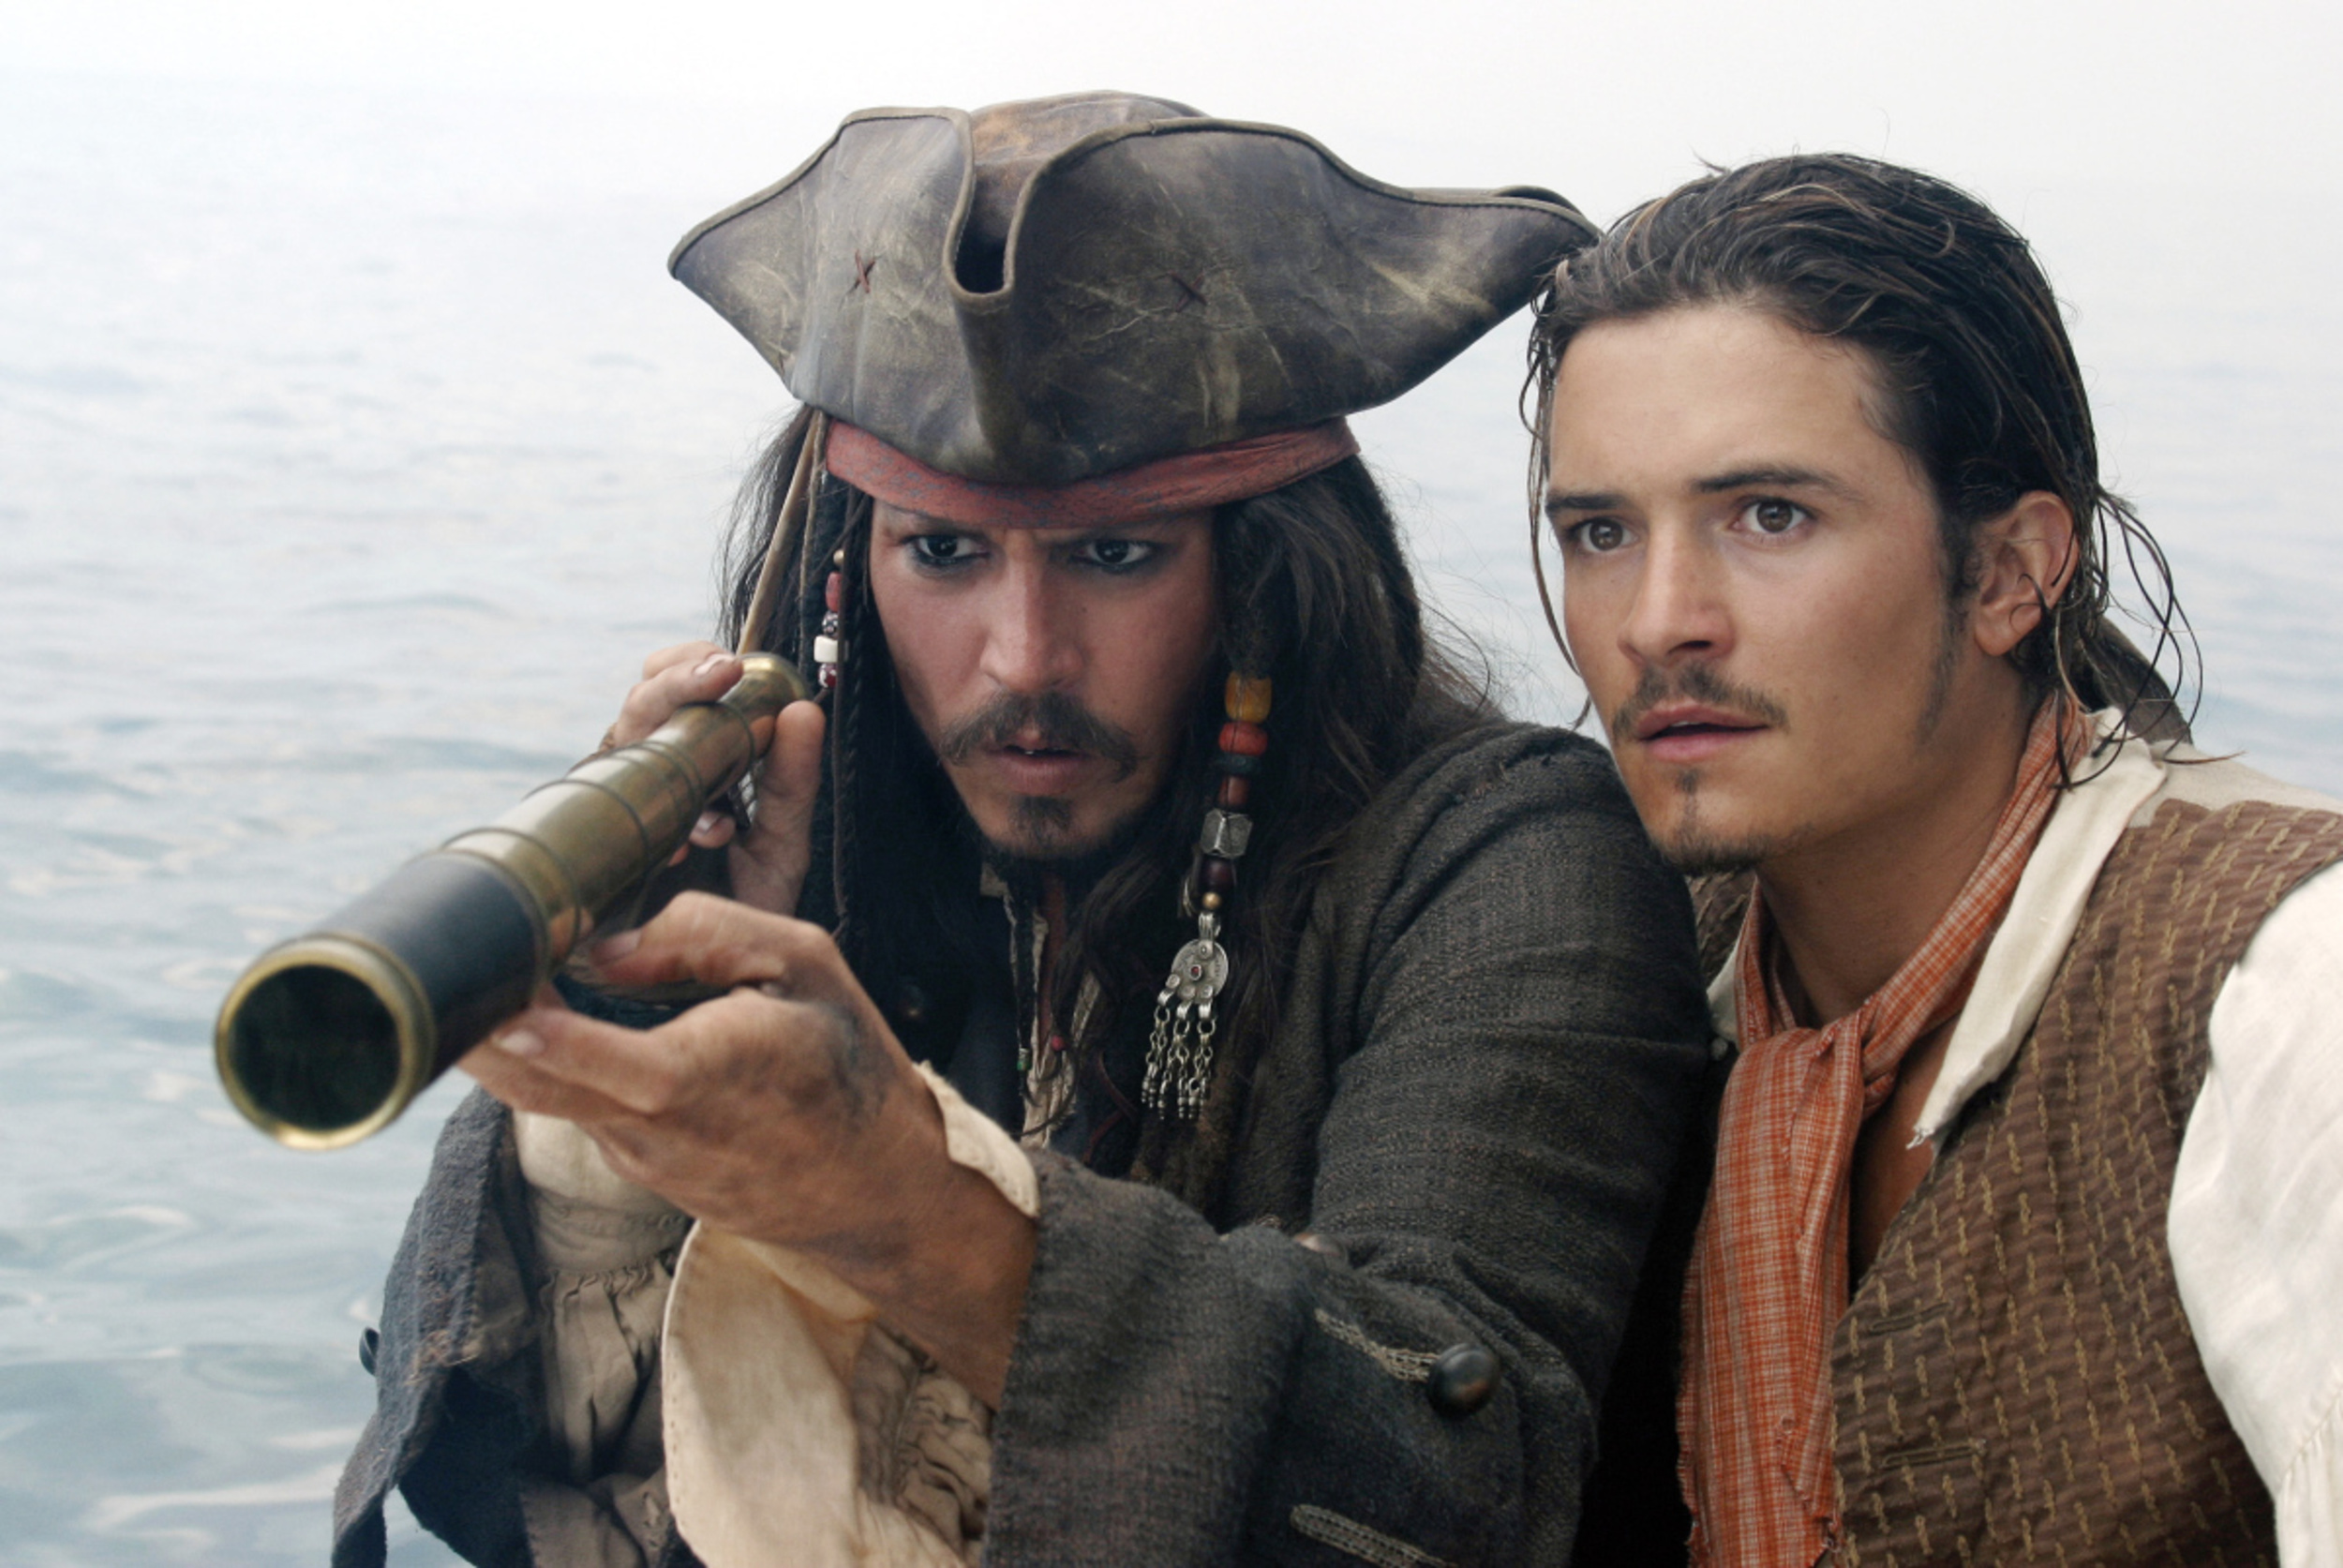 <p>When Disney Studios announced it would start adapting its theme park rides into feature films, a lot of people thought it must've meant the movie idea well had run dry. Instead, the first <em>Pirates of the Caribbean</em> movie turned out to be one of the studios' most successful and beloved films, live-action or otherwise. </p><p>The trailer showed Jerry Bruckheimer's name attached to the project, a filmmaker known for focusing more on special effects than story. The storyline seemed to be repeating the scenes from the iconic boat ride. The film, however, turned out to be a clever, well-written, and fantastic journey into a genre of movie everyone thought had run out of original ideas long ago. It not only spawned a new Disney franchise but one of its most beloved characters, the sly and wily Captain Jack Sparrow, played to perfection by Johnny Depp. Sparrow is so beloved that Disney worked his animatronic character into the <em>Pirates of the Caribbean</em> ride in both parks and built an impressive attraction based on the film franchise in Shanghai Disneyland. </p><p>You may also like: <a href='https://www.yardbarker.com/entertainment/articles/music_artists_who_walked_away_at_the_top_of_their_game/s1__38415541'>Music artists who walked away at the top of their game</a></p>